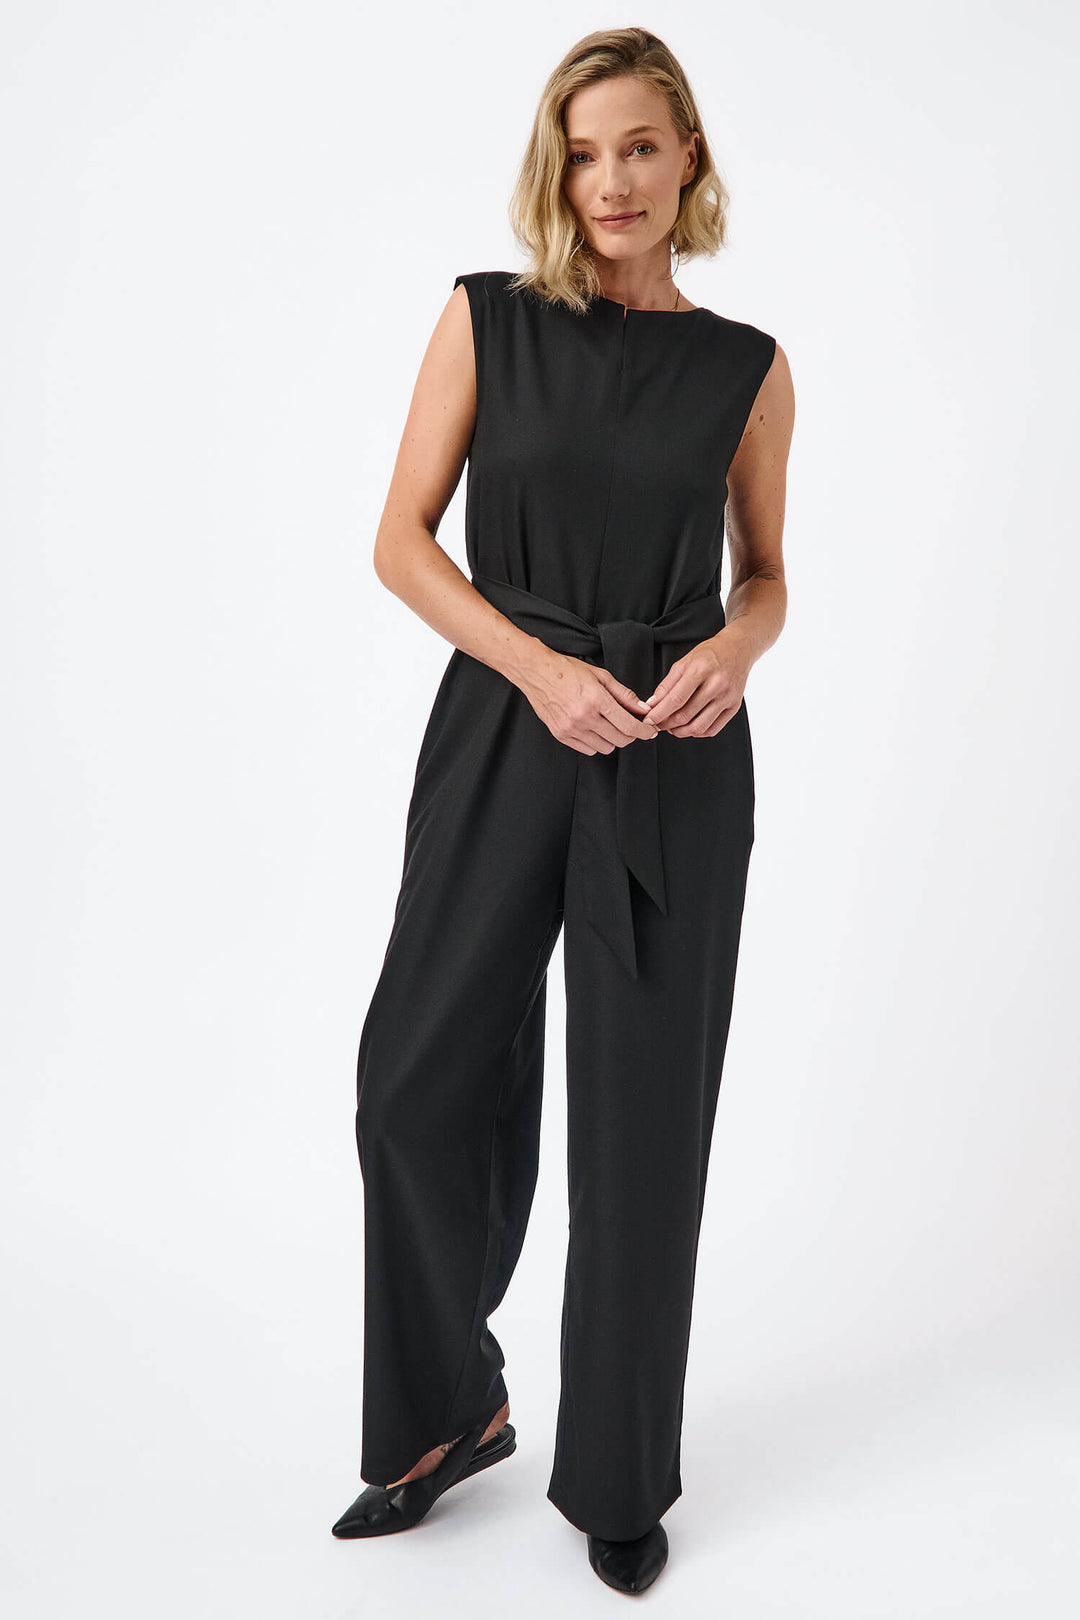 Belted sleeveless jumpsuit